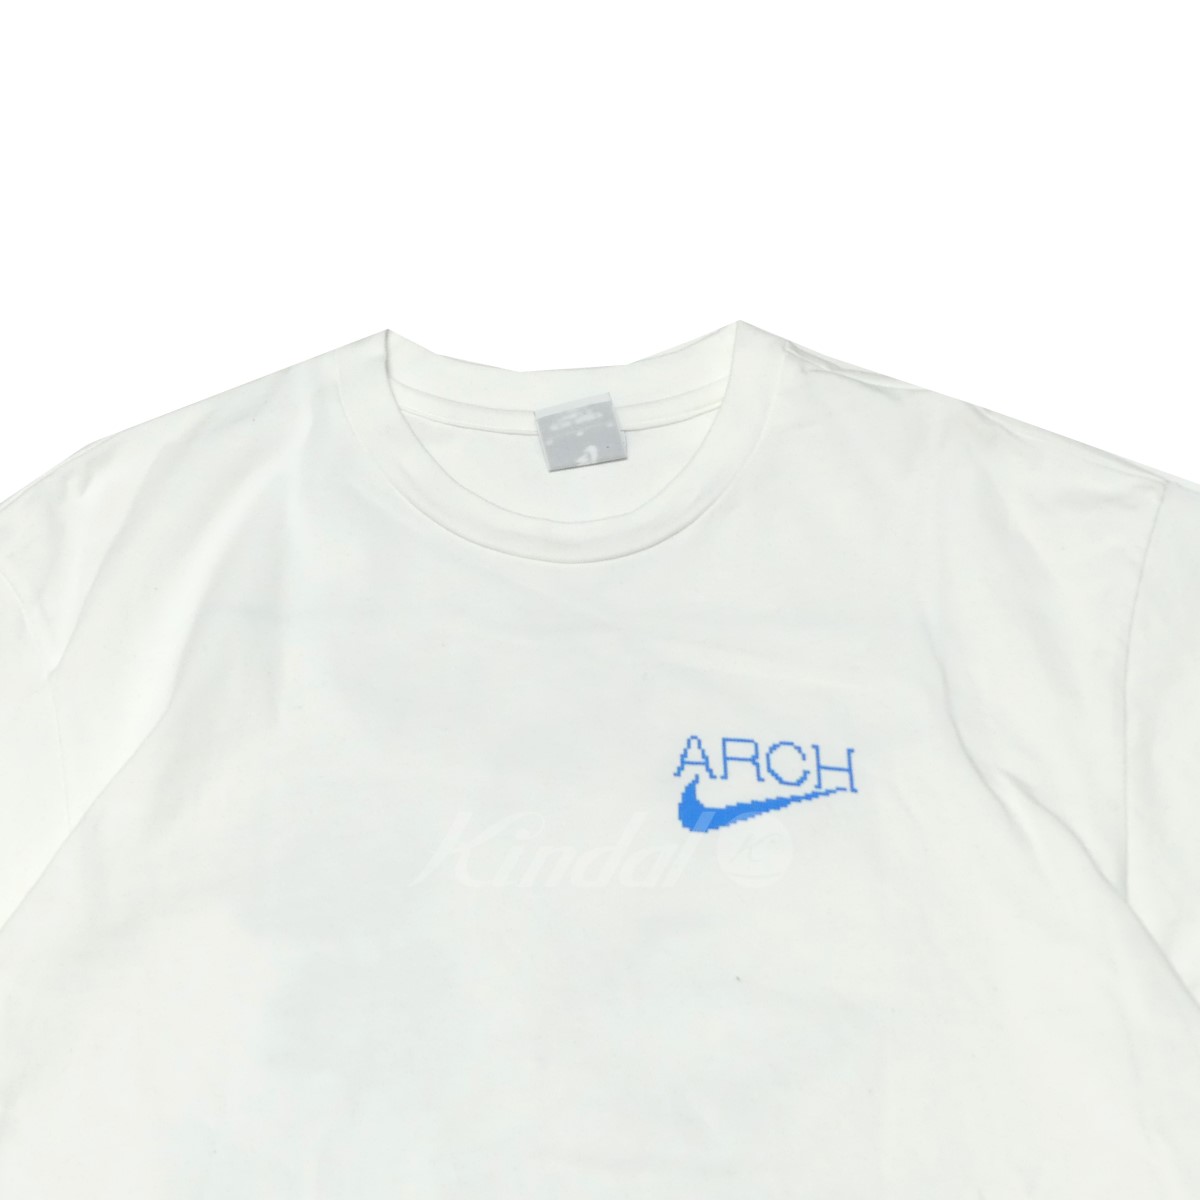 NIKE X OFF-WHITE CL T-SHIRT ヴァージルアブロー | www.layer.co.il